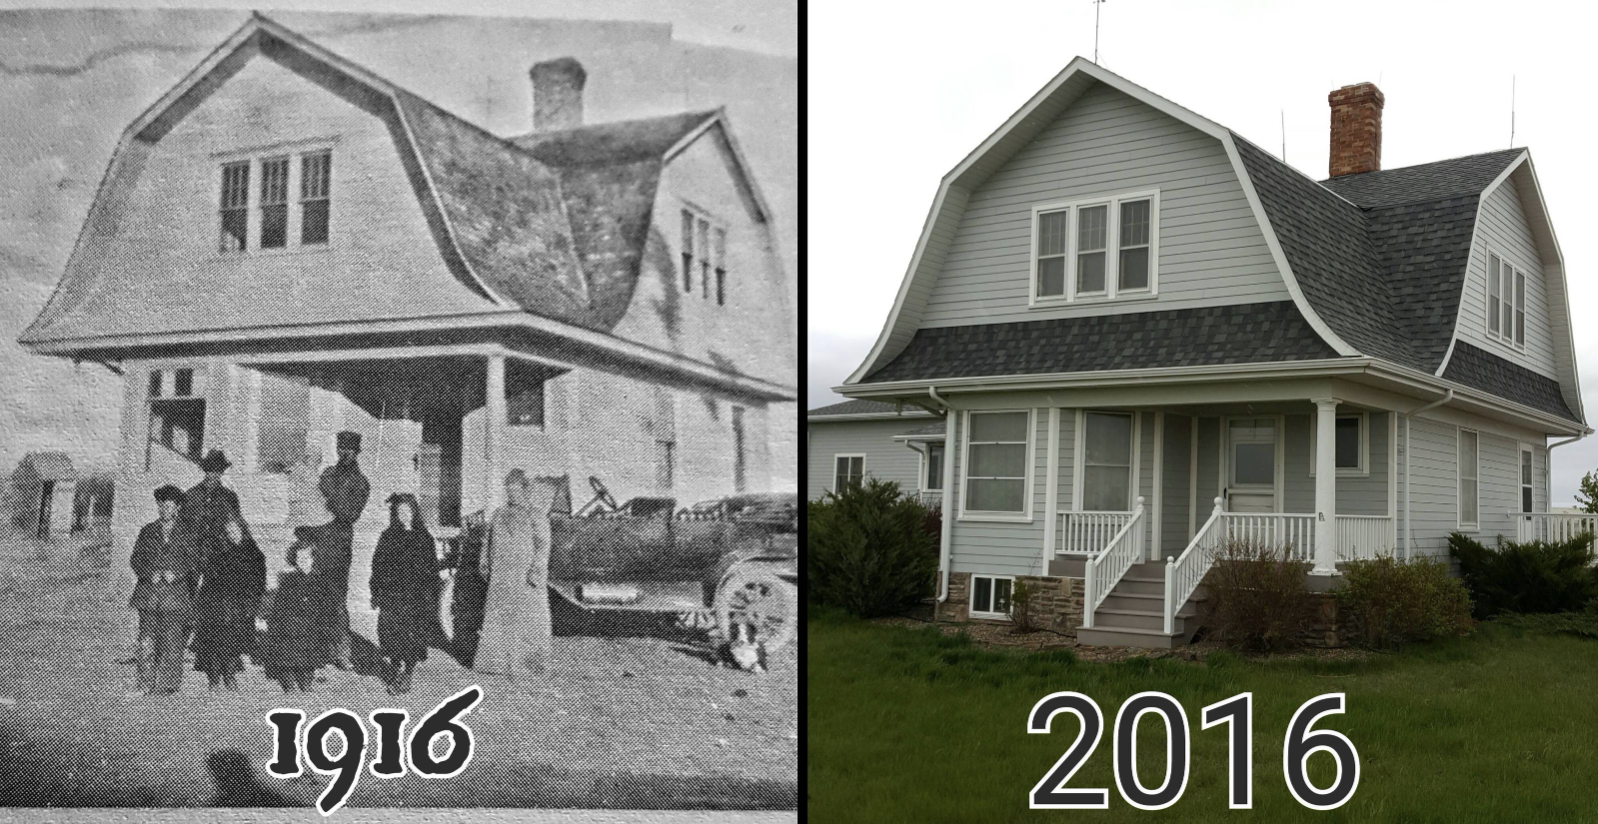 Side-by-side photo of a two-story house in 1916 with a family in front, and the same house in 2016, restored